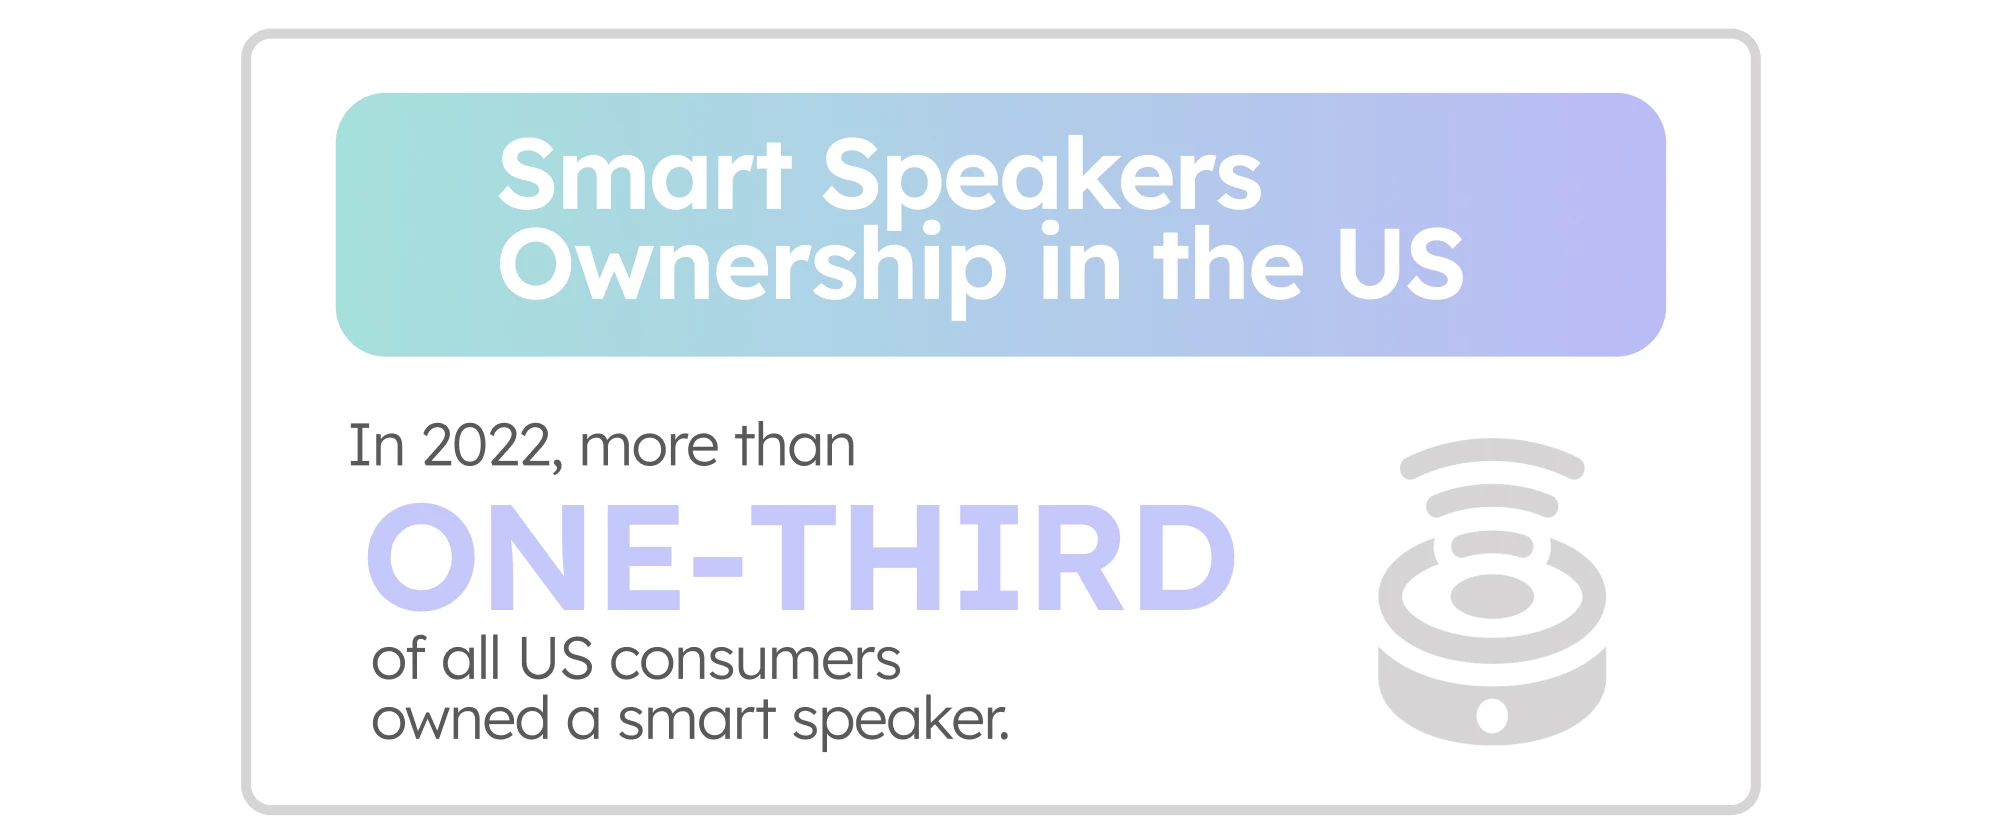 Smarts peakers ownership in the US